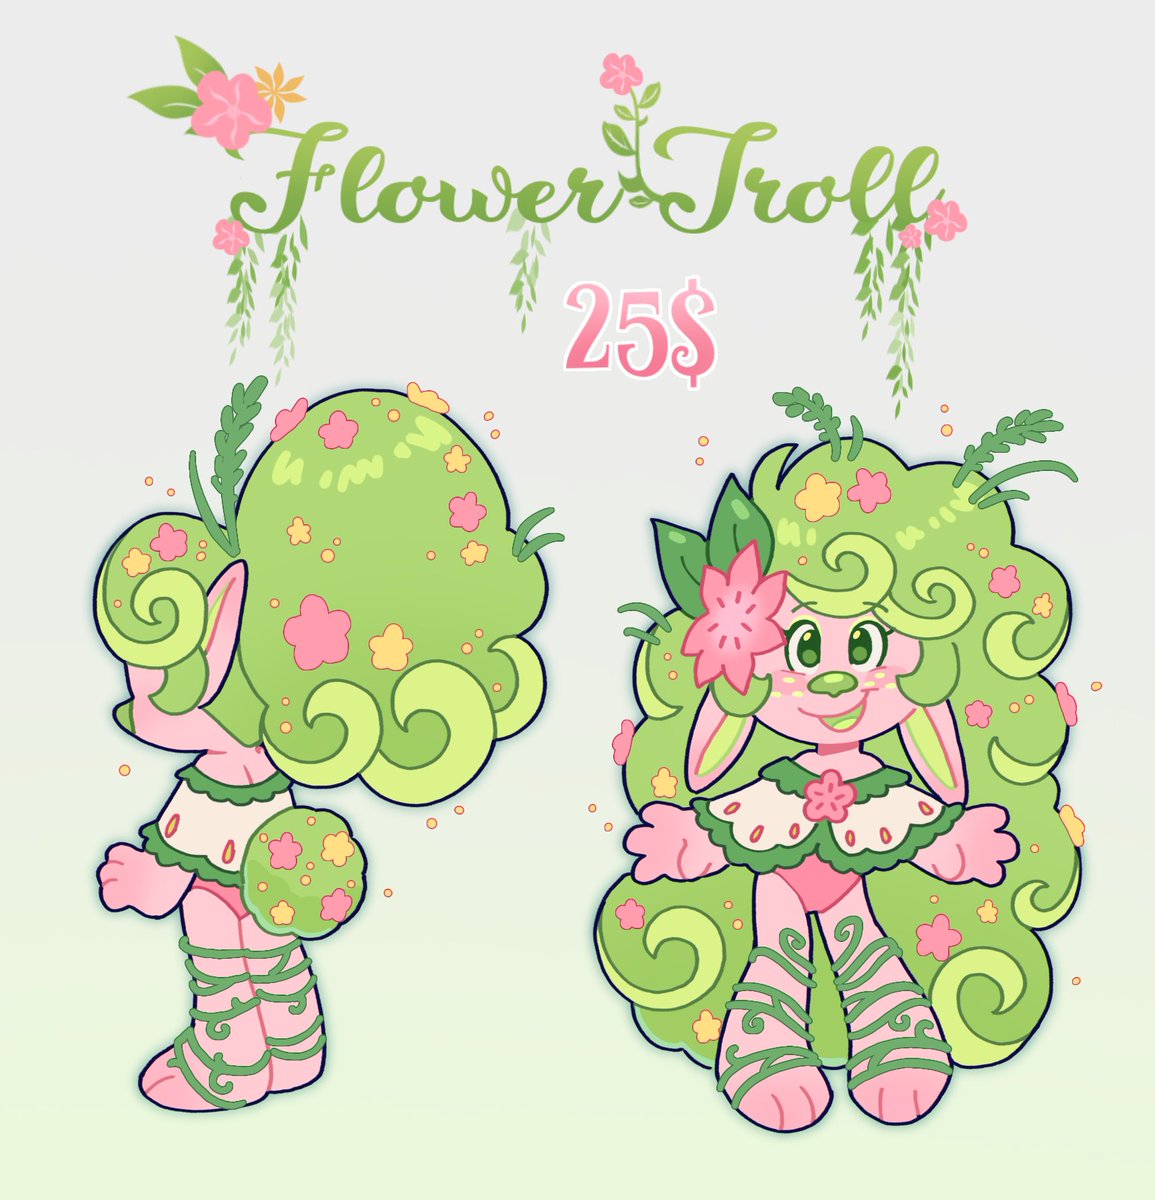 TROLL ADOPT!!!

new troll adopt inspired by one of my favorite Pokémon Shaymin🌸🌷🍀

She is 25$! So if anyone is interested just Dm me or comment below!

#trolls #trollsfanart #trollsoc #adoptable